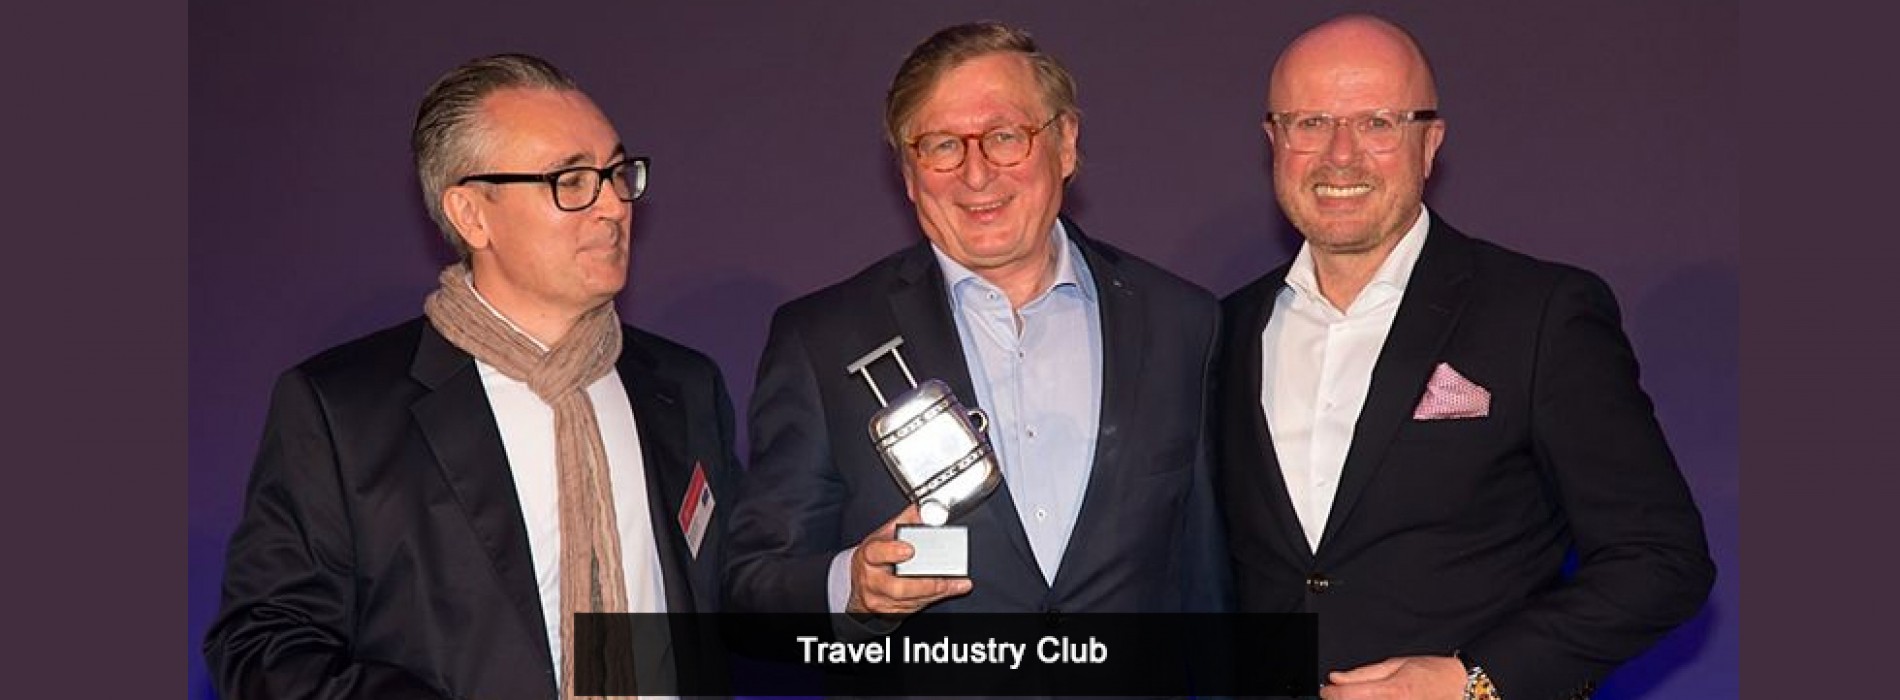 Munich Airport’s CEO voted “2017 Travel Industry Manager”